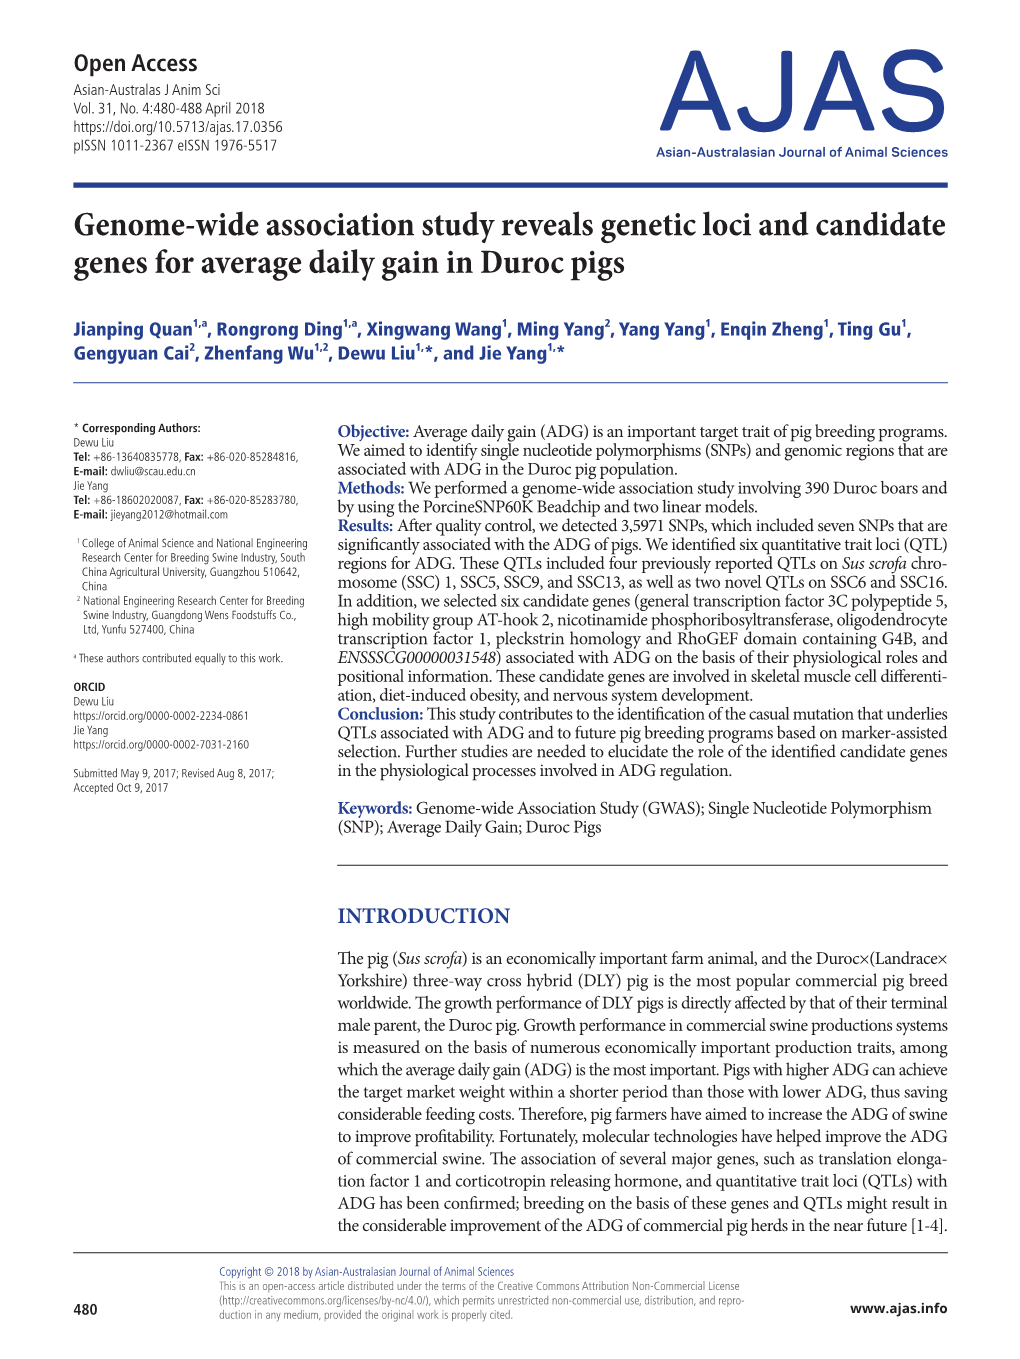 Genome-Wide Association Study Reveals Genetic Loci and Candidate Genes for Average Daily Gain in Duroc Pigs